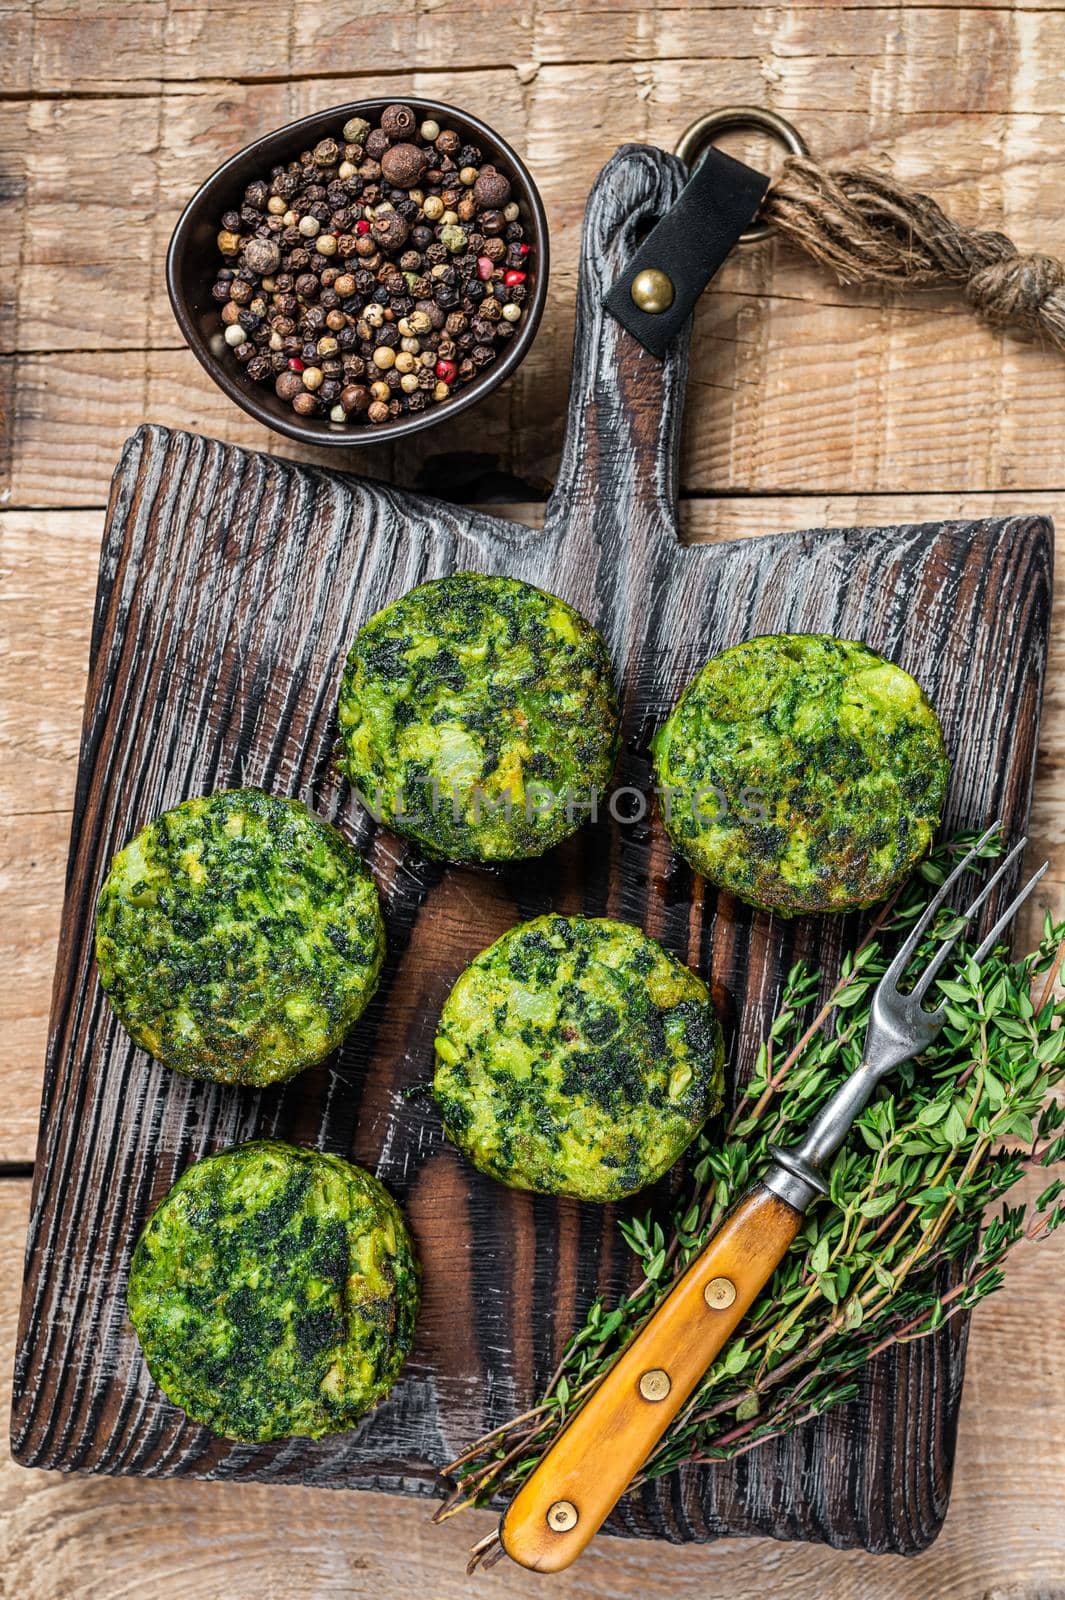 Vegetarian vegetable burgers patty with herbs on wooden board. Wooden background. Top view by Composter